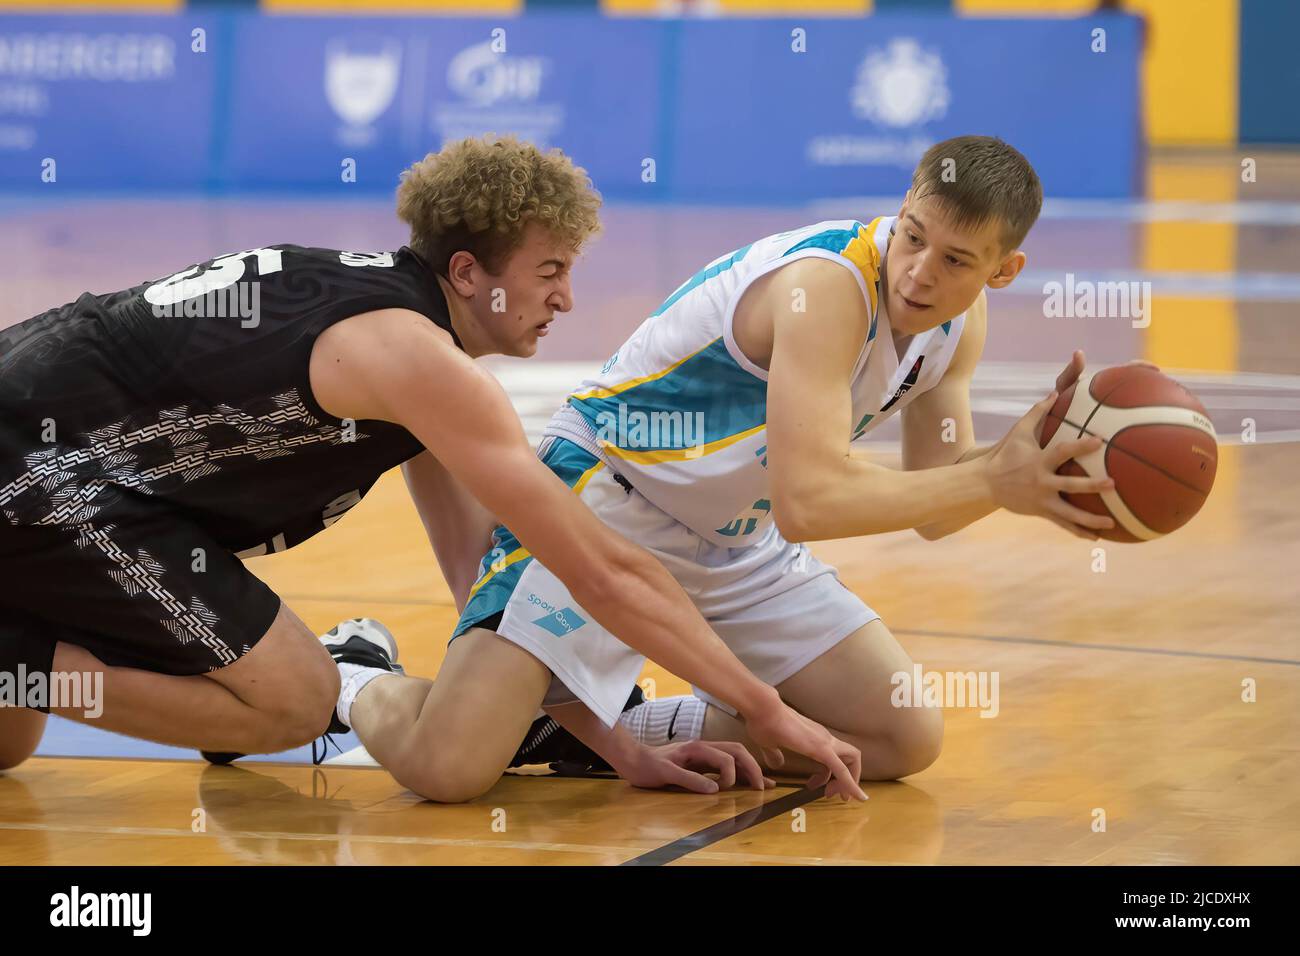 Doha, Qatar. 12th June, 2022. Kalid Petzer (L) of New Zealand Basketball  team and Yegor Samoilov of Kazakhstan Basketball team in action during the  2022 FIBA U16 Asian Championship match between New